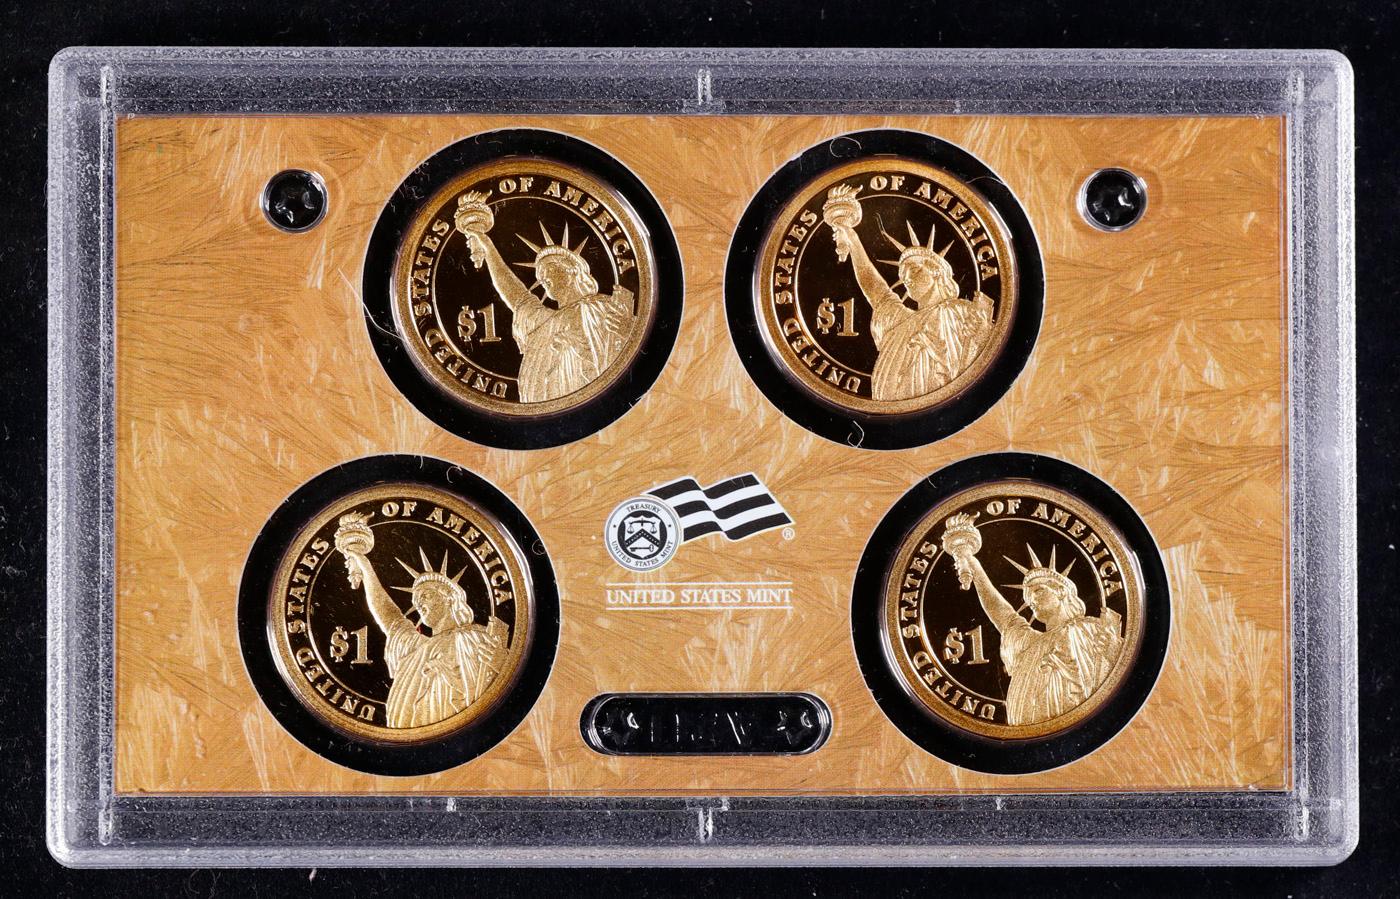 2009 PRESIDENTIAL Dollar Proof Set No Outer Box